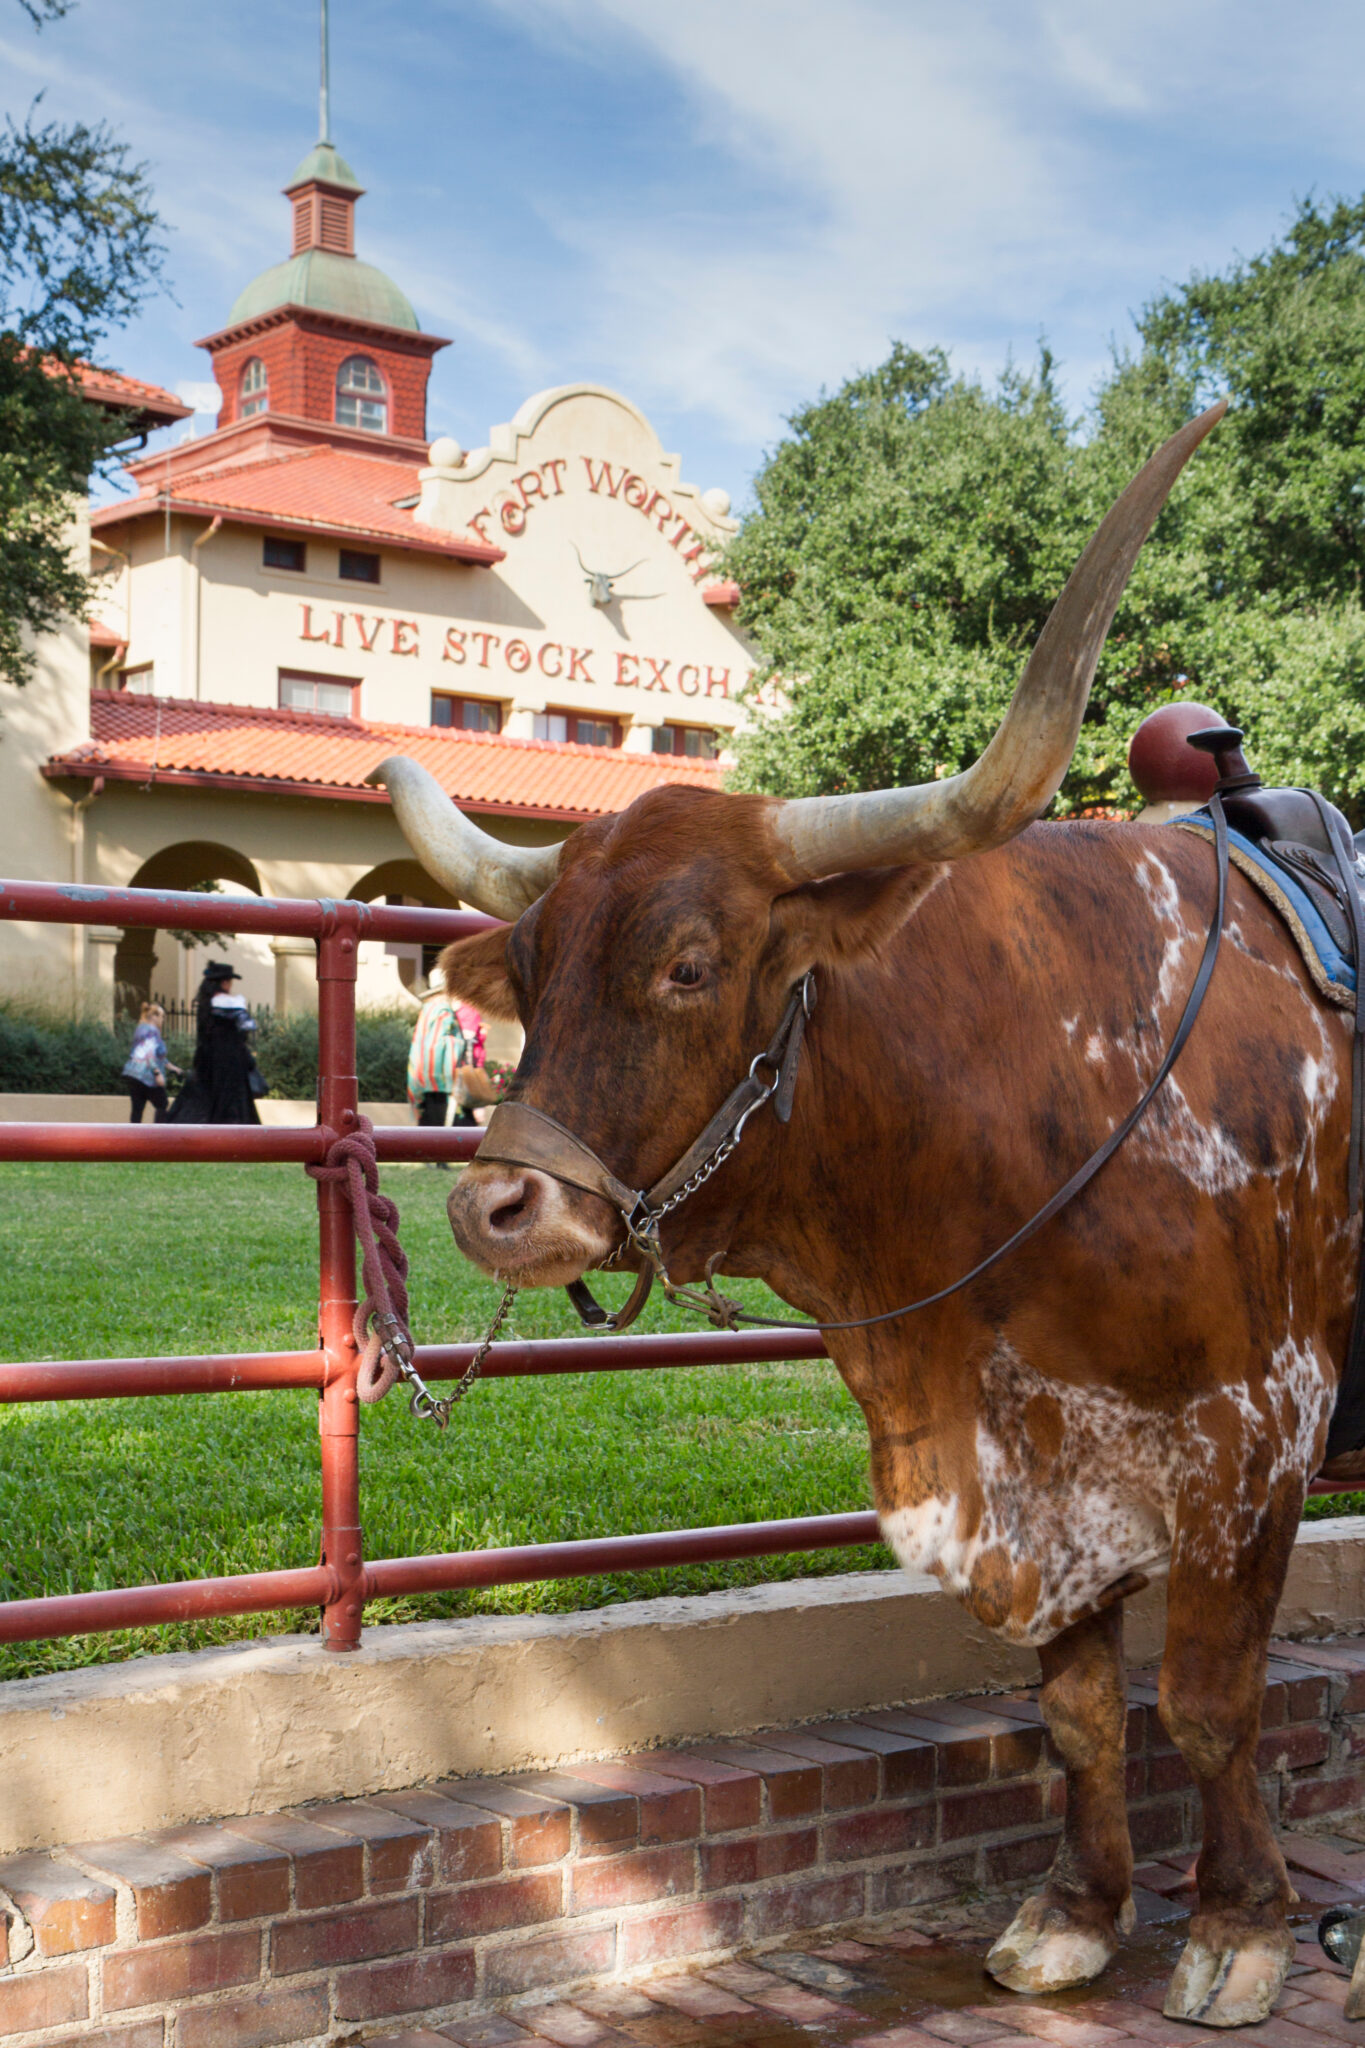 Top 20 Things To Do At The Fort Worth Stockyards in Fort Worth, Texas